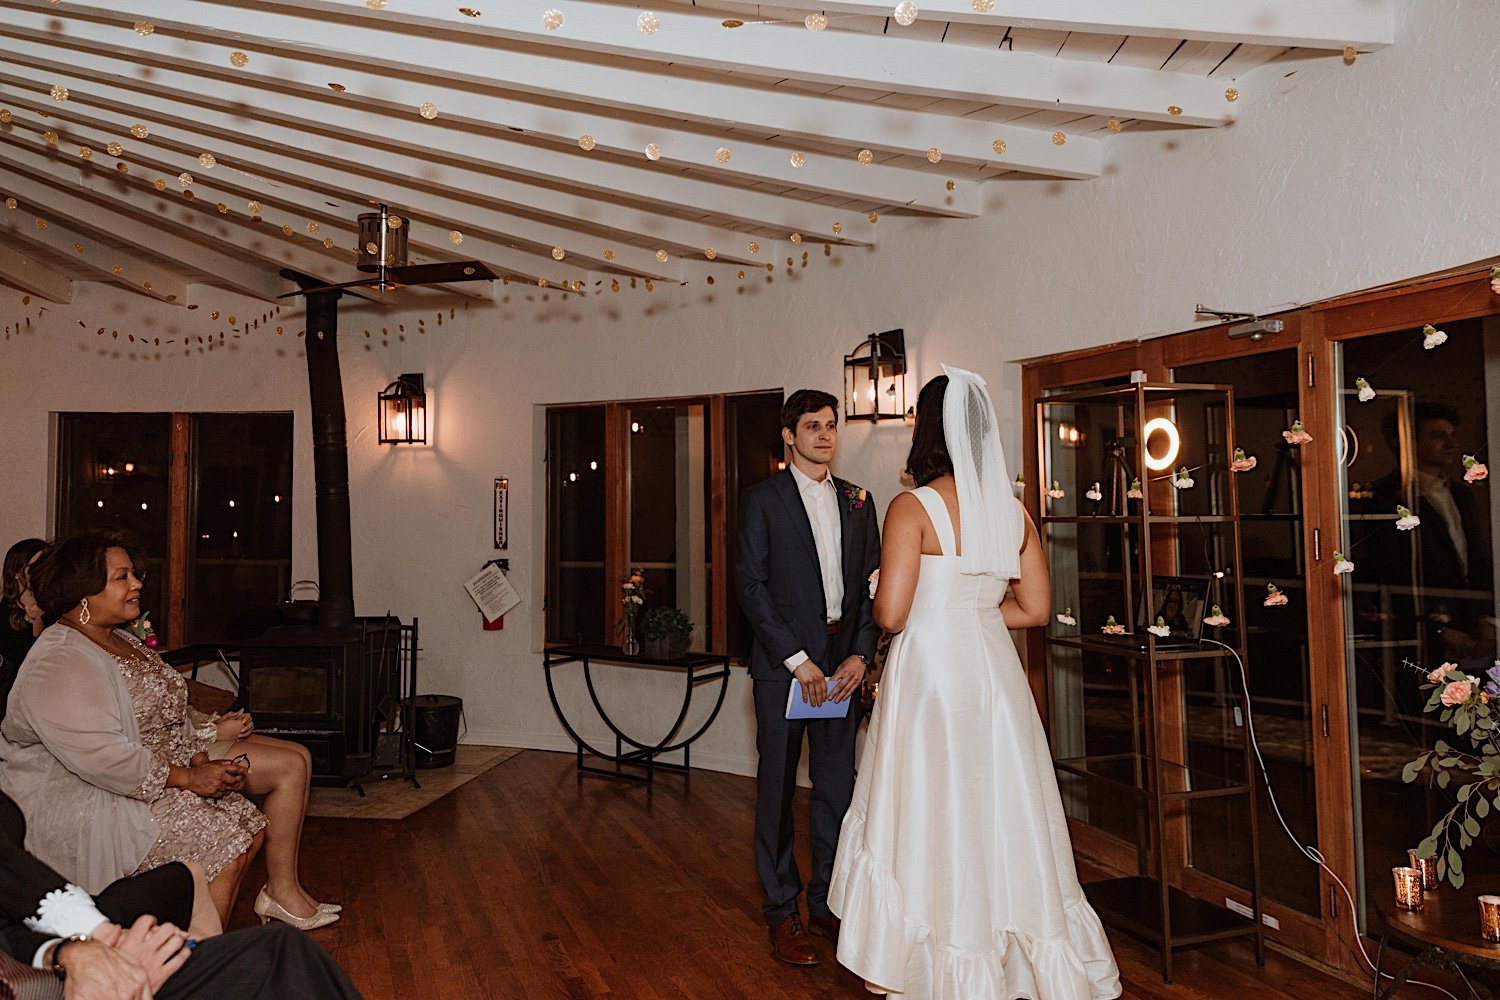 Bride and groom at intimate Indiana wedding reception